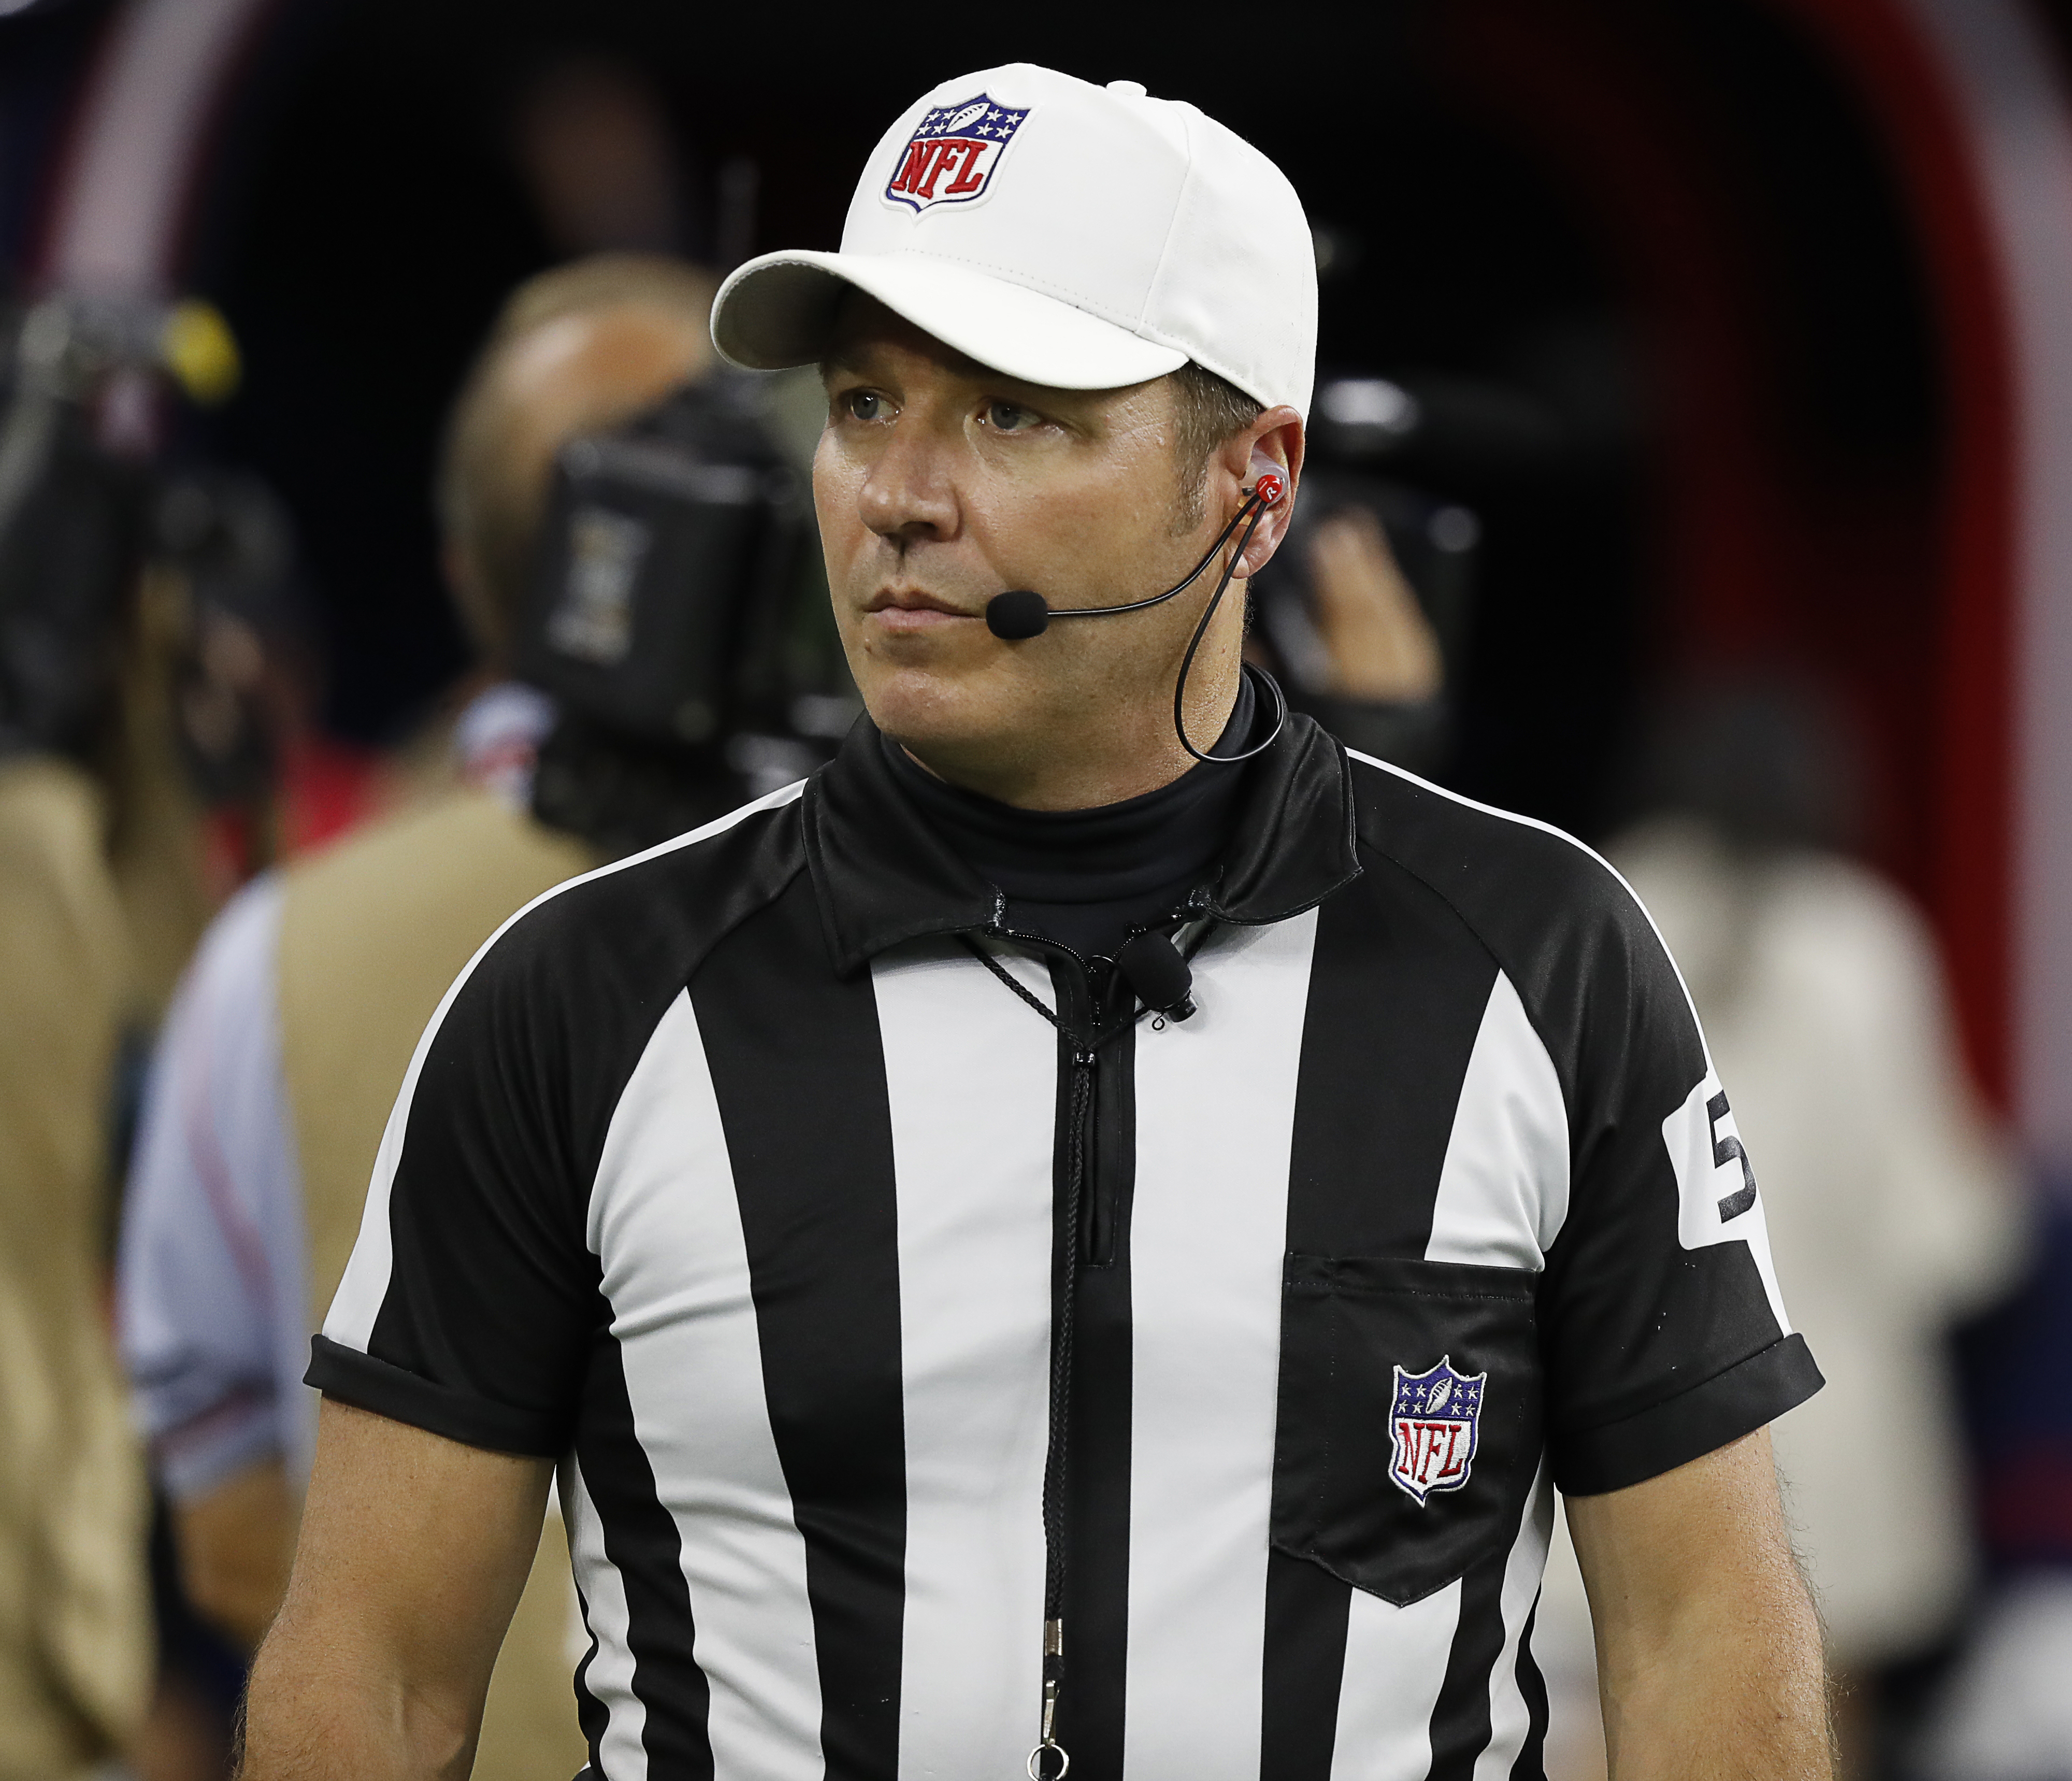 Referee Alex Kemp: Umpire Spotted Football 'Properly' at End of 49ers vs. Cowboys